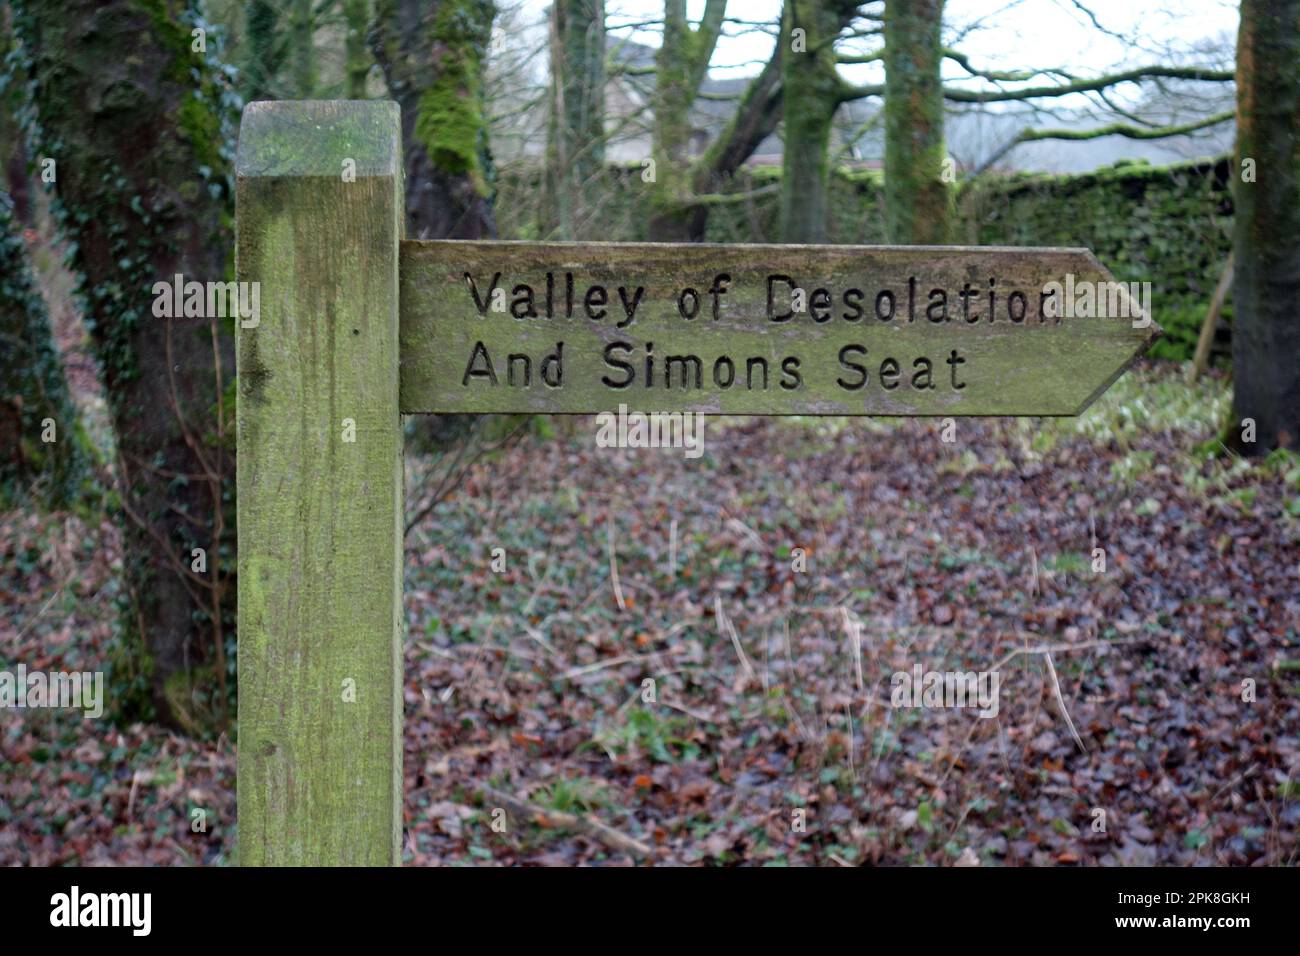 Wooden Signpost for Valley of Desolation & Simons Seat, Bolton Abbey, Wharfdale, Yorkshire Dales, England, UK Stock Photo